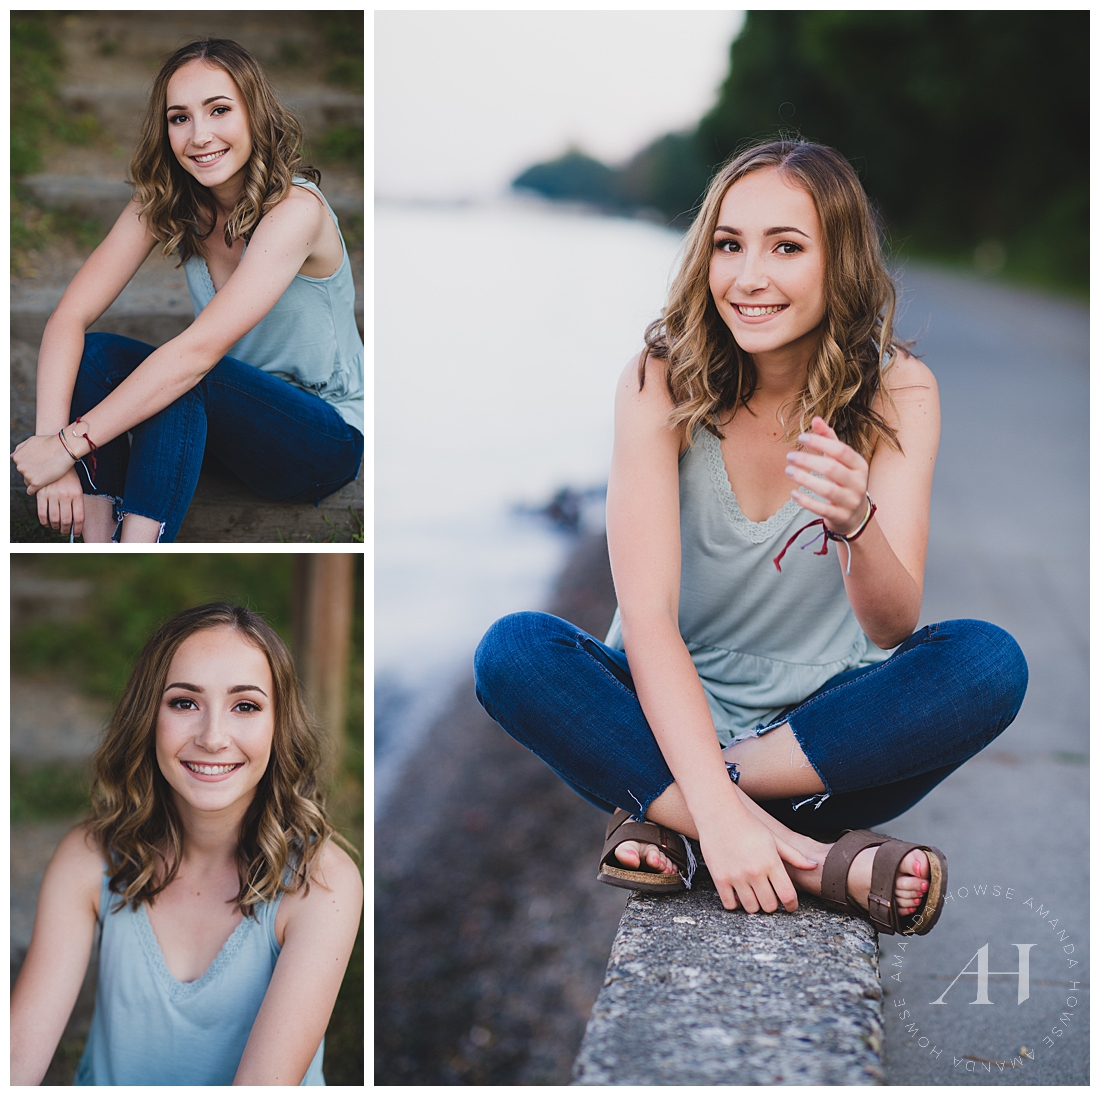 Cute PNW senior portraits on the beach with casual outfit and birkenstocks photographed by Tacoma senior photographer Amanda Howse